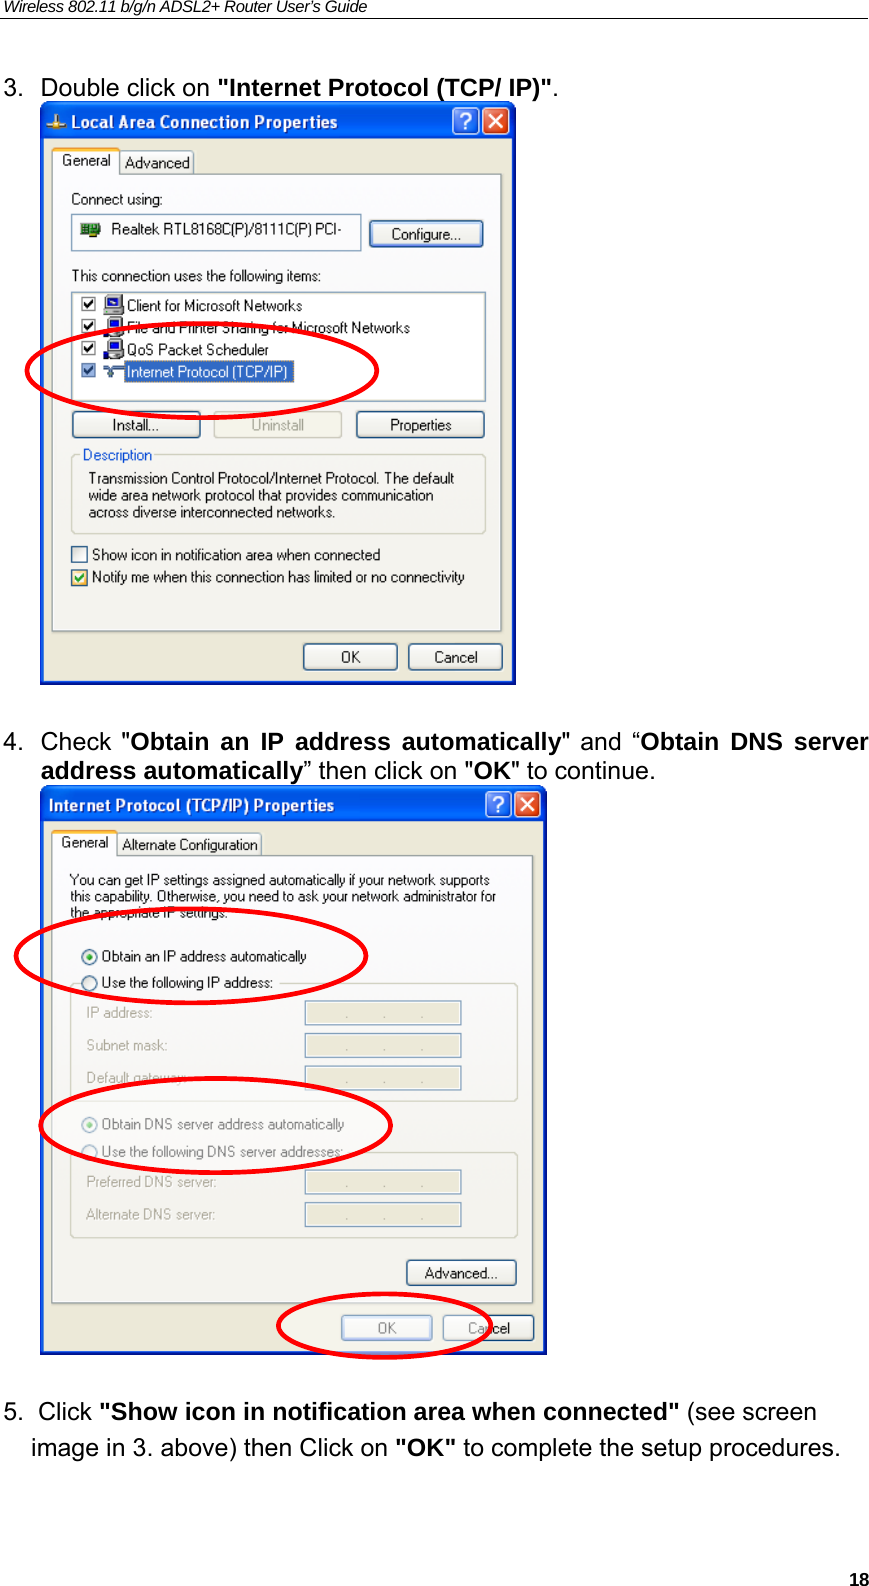 Wireless 802.11 b/g/n ADSL2+ Router User’s Guide    3.  Double click on &quot;Internet Protocol (TCP/ IP)&quot;.   4. Check &quot;Obtain an IP address automatically&quot; and “Obtain DNS server address automatically” then click on &quot;OK&quot; to continue.    5.  Click &quot;Show icon in notification area when connected&quot; (see screen     image in 3. above) then Click on &quot;OK&quot; to complete the setup procedures.  18